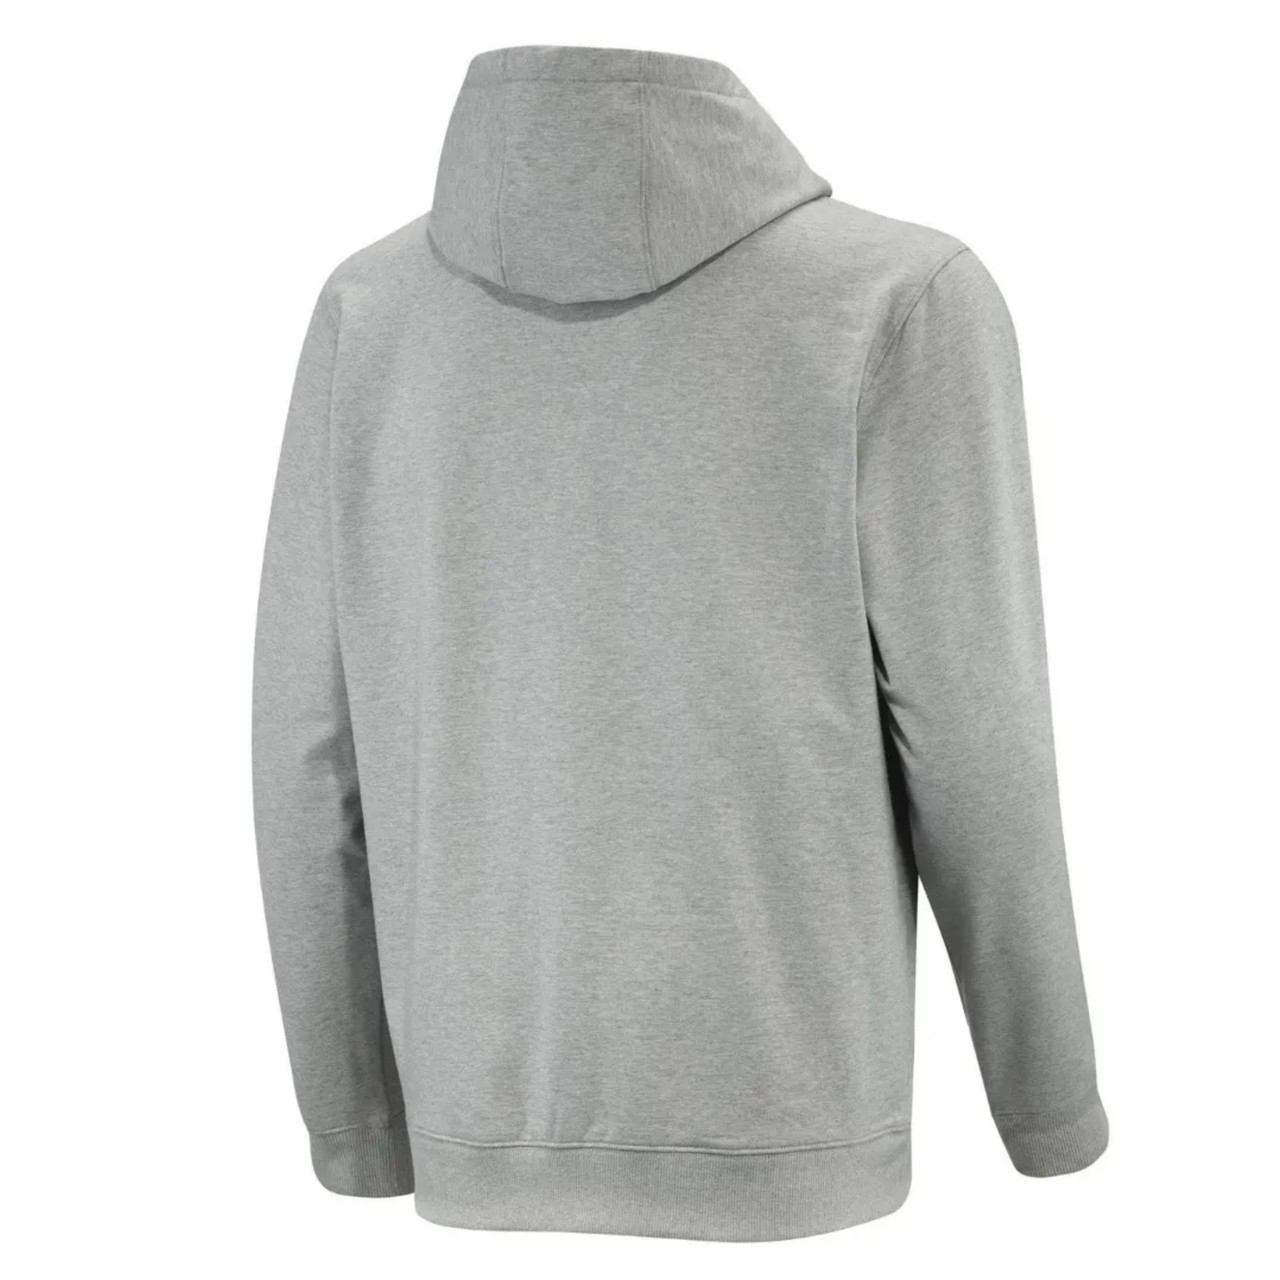 Can-Am New OEM Men's 3X-Large Heather Grey Premium Pullover Hoodie, 4545451627